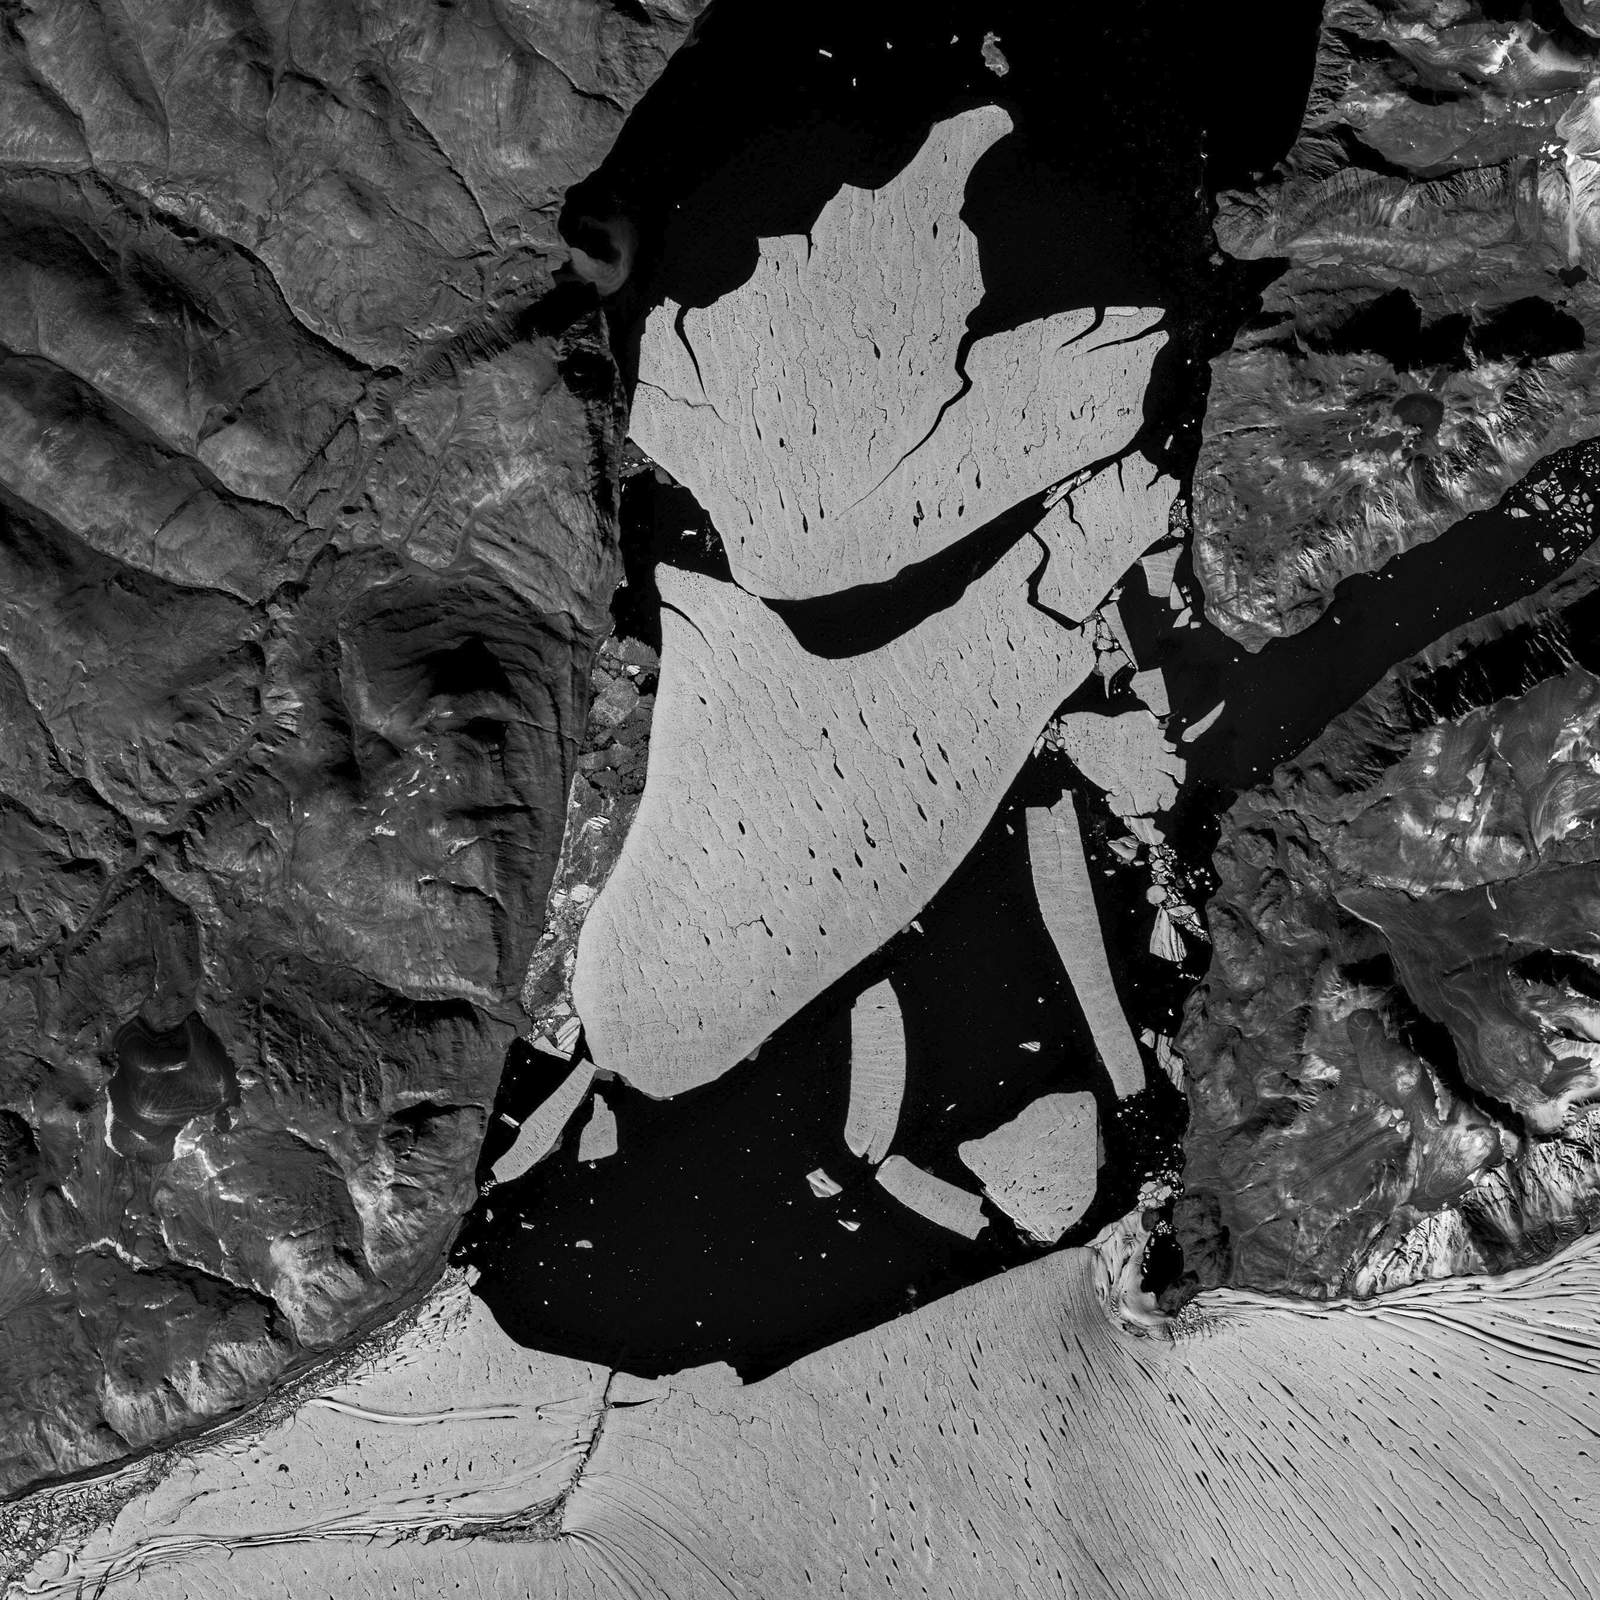 Dismay as huge chunk of Greenland’s ice cap breaks off